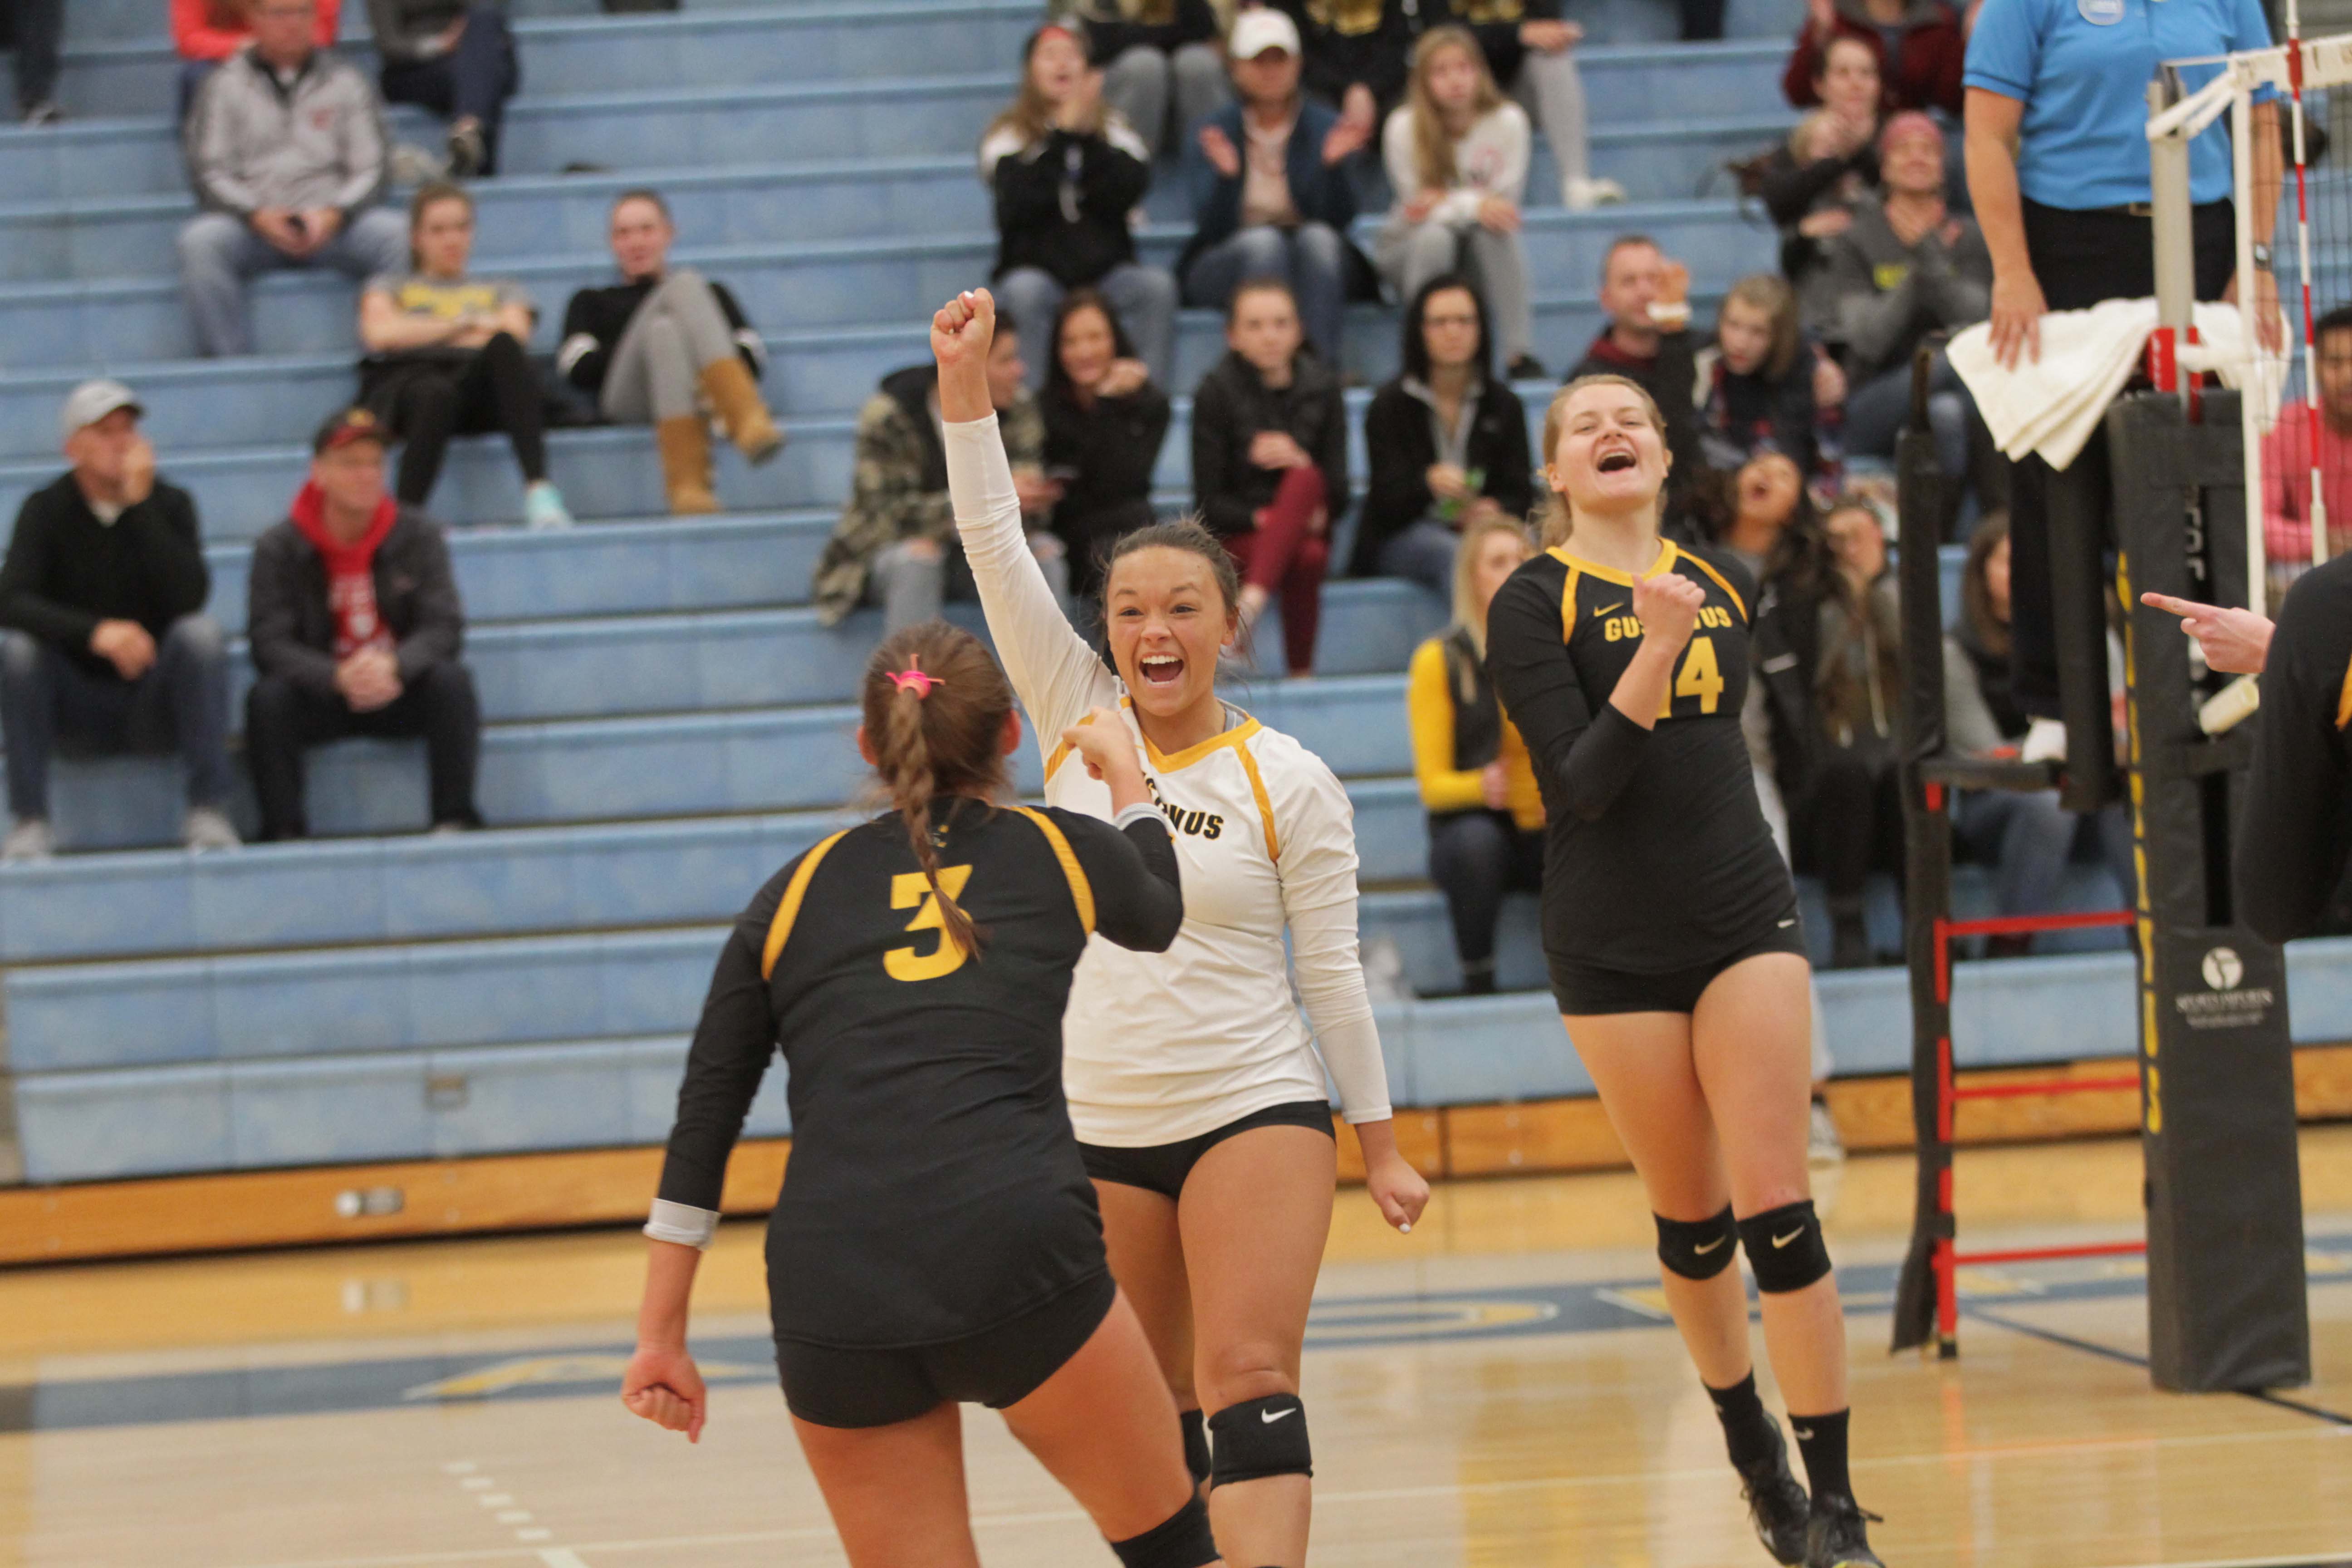 Senior Brittany Leuthmers celebrates with her teammates after winning a point. Leuthmers recently earned the honor of MIAC Defensive Player of the Year for the second consecutive year.